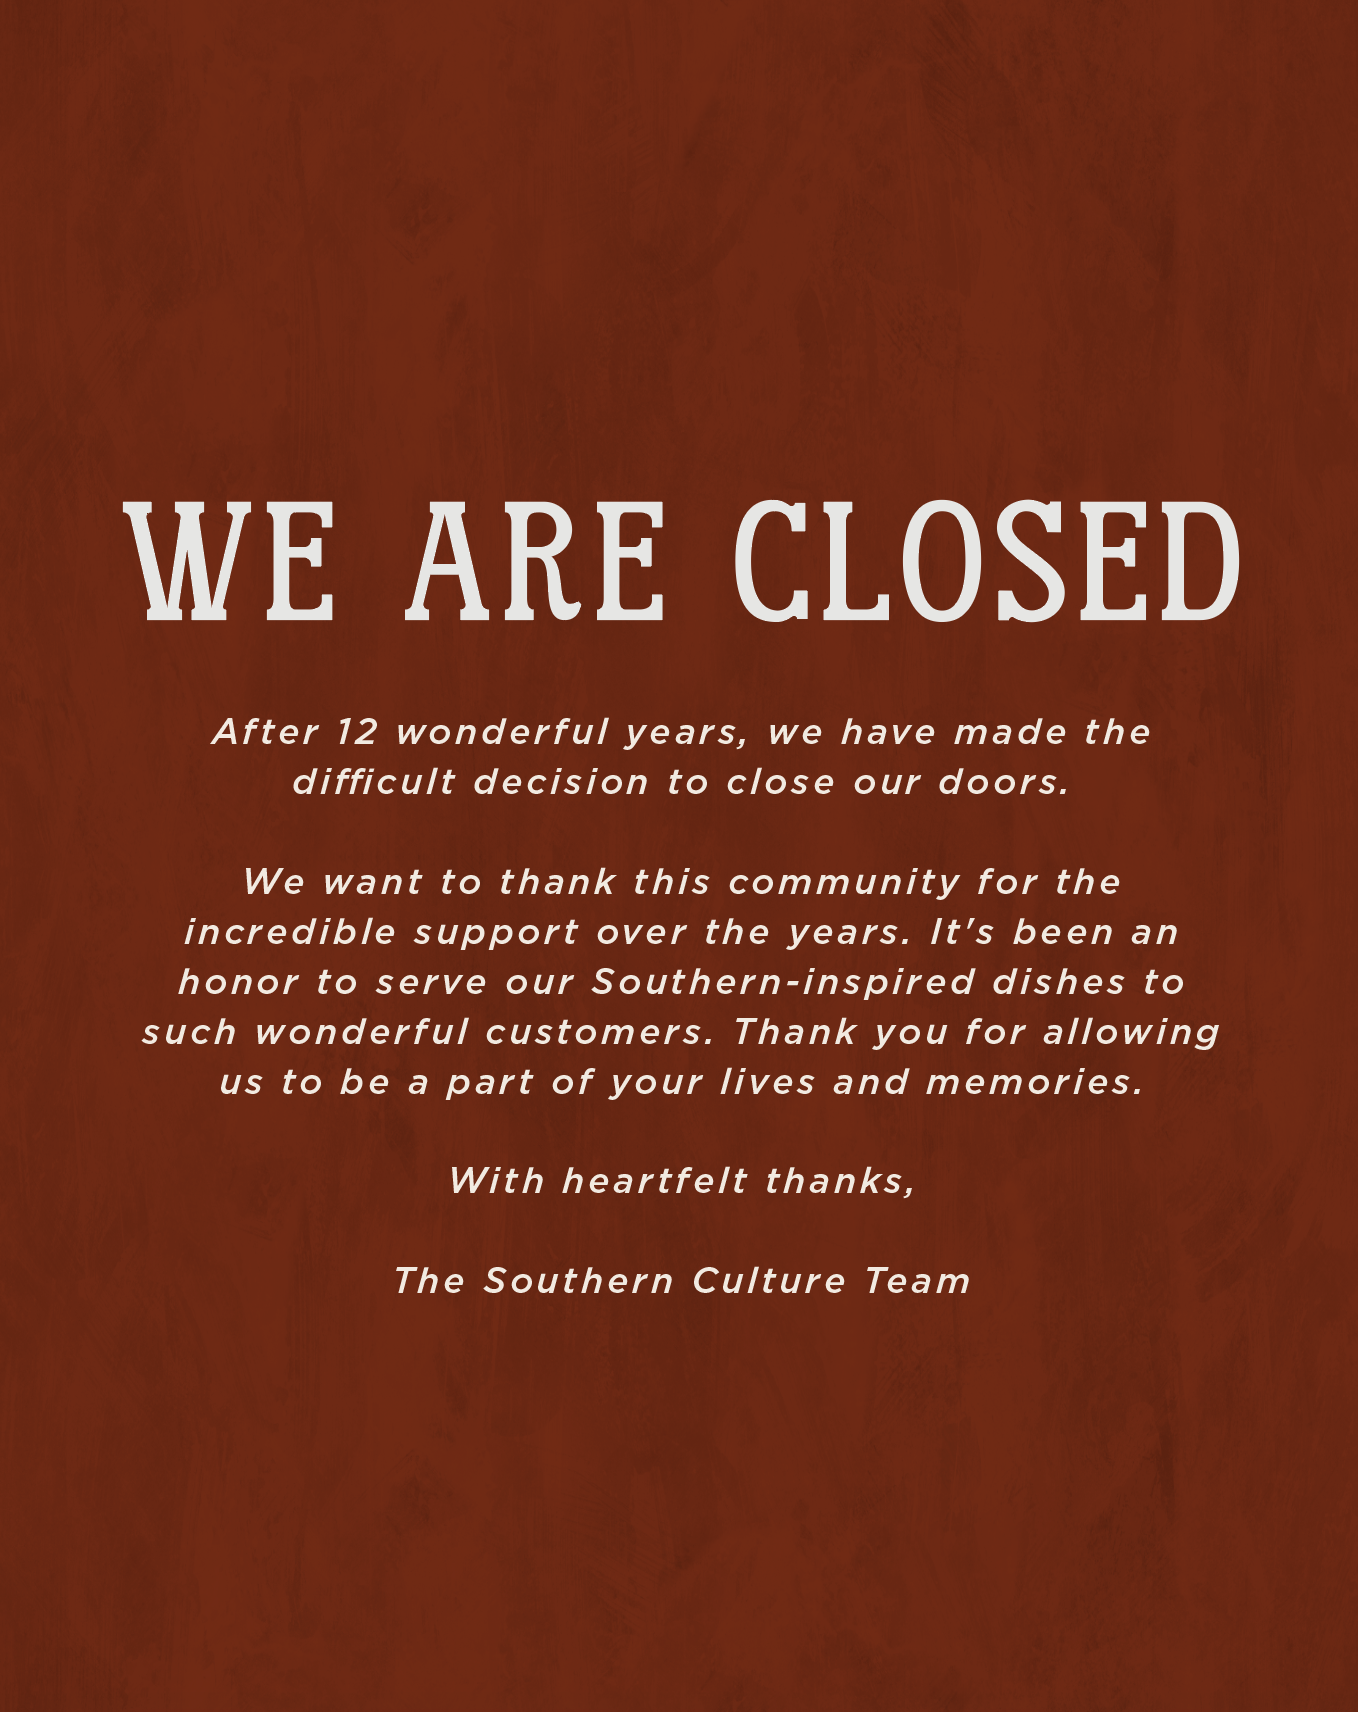 We are closed